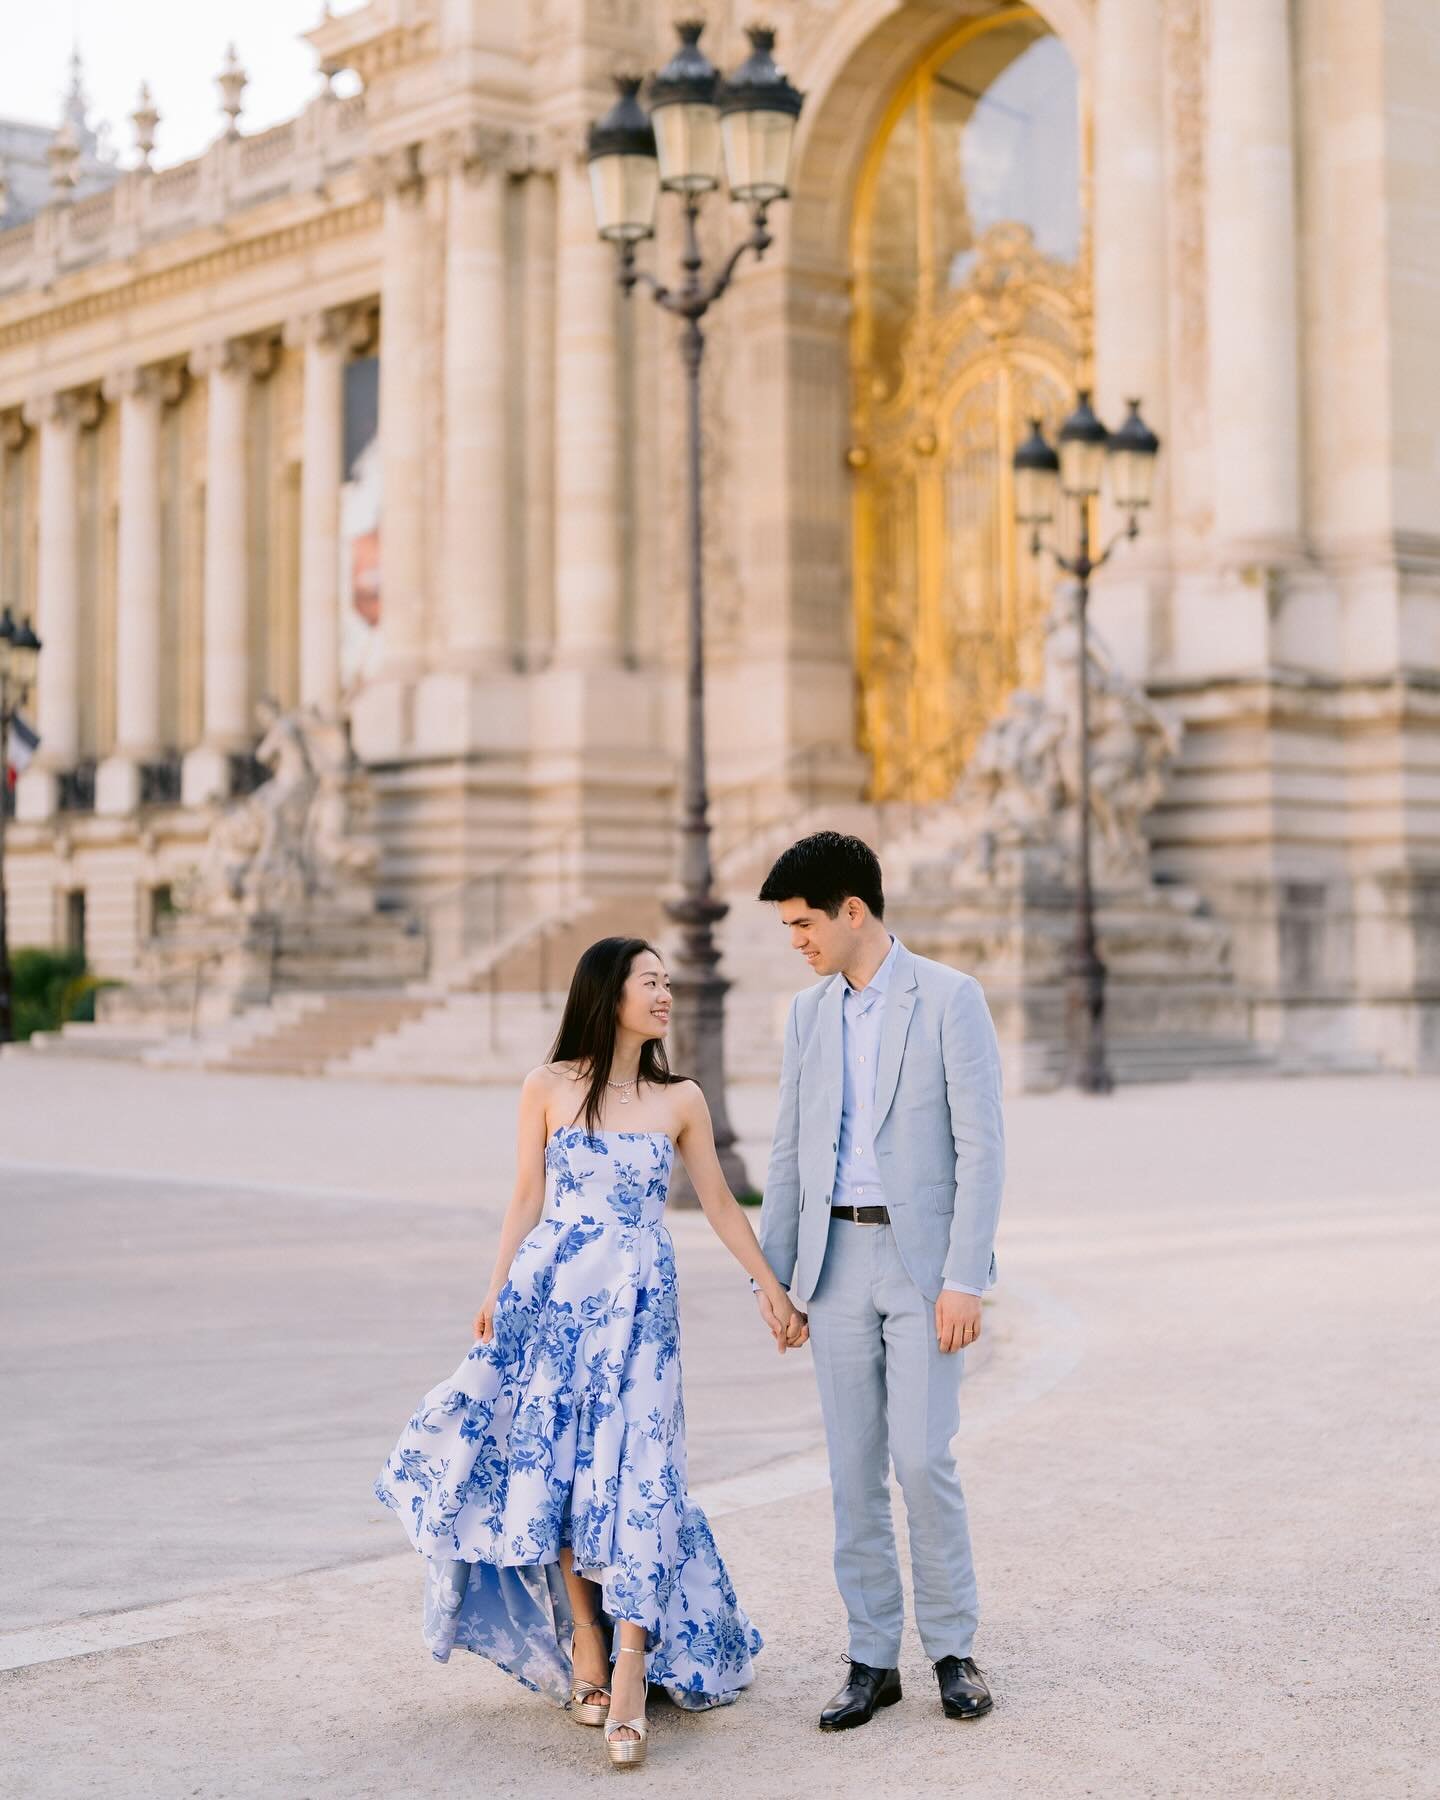 When in Paris: filled with the aroma of freshly baked pastries and the soft hum of early risers starting their day.

&bull;
&bull;
&bull;

#venicephotographer#destinationweddingphotographer#engagement#engagementitaly#engagementvenice#proposalvenice#v